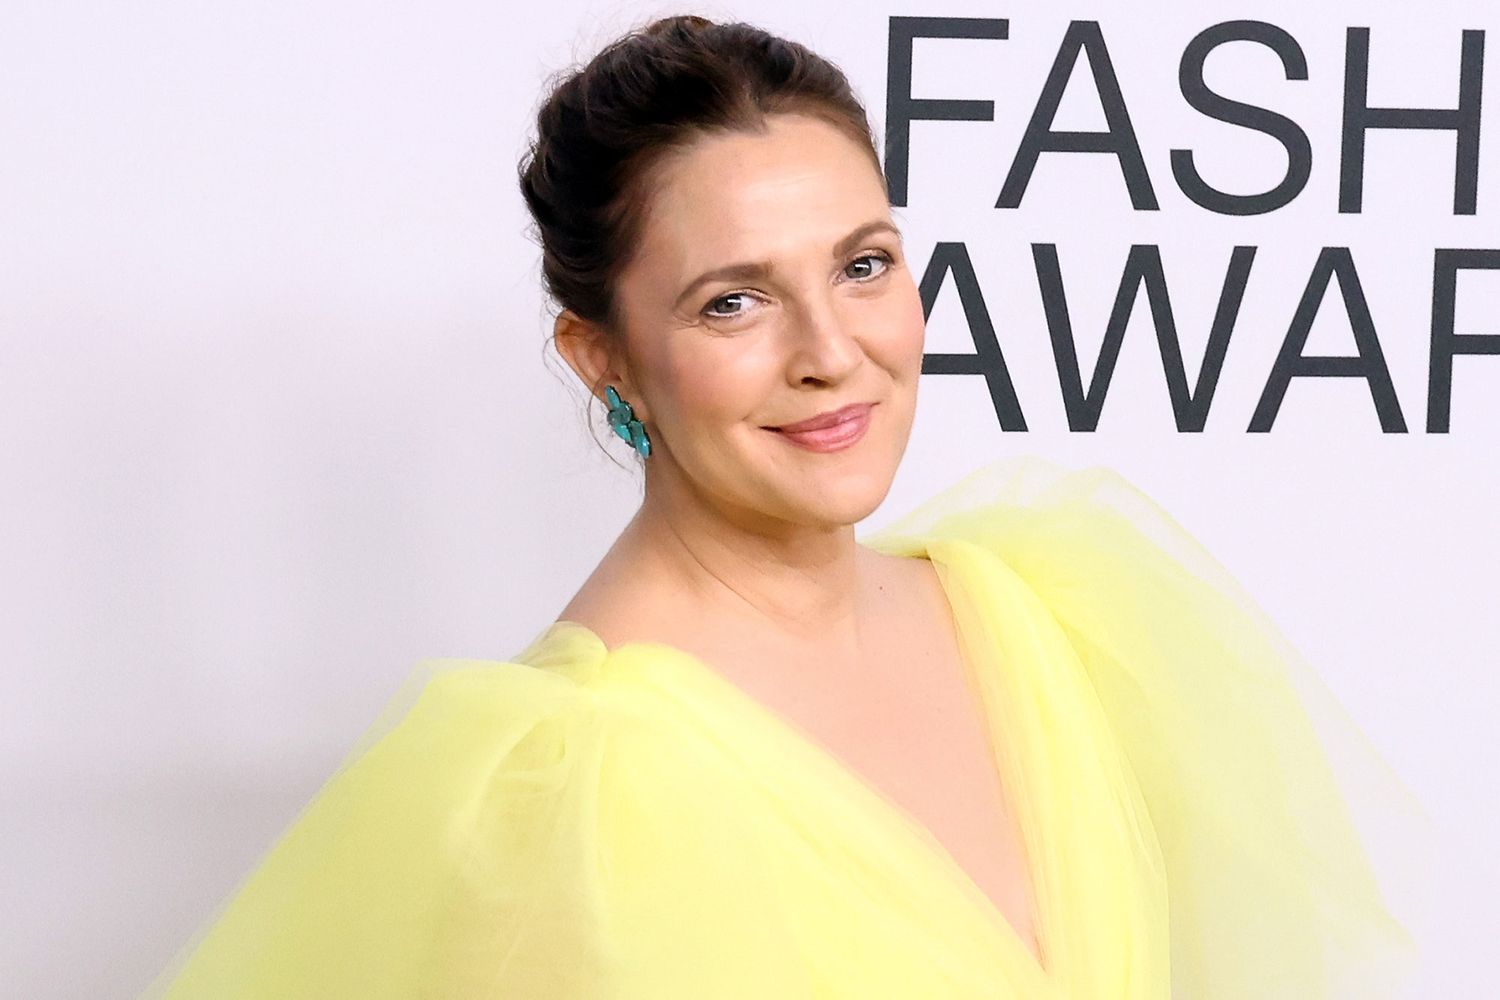 Watch Drew Barrymore lose it over her greatest co-star ever (the rain)